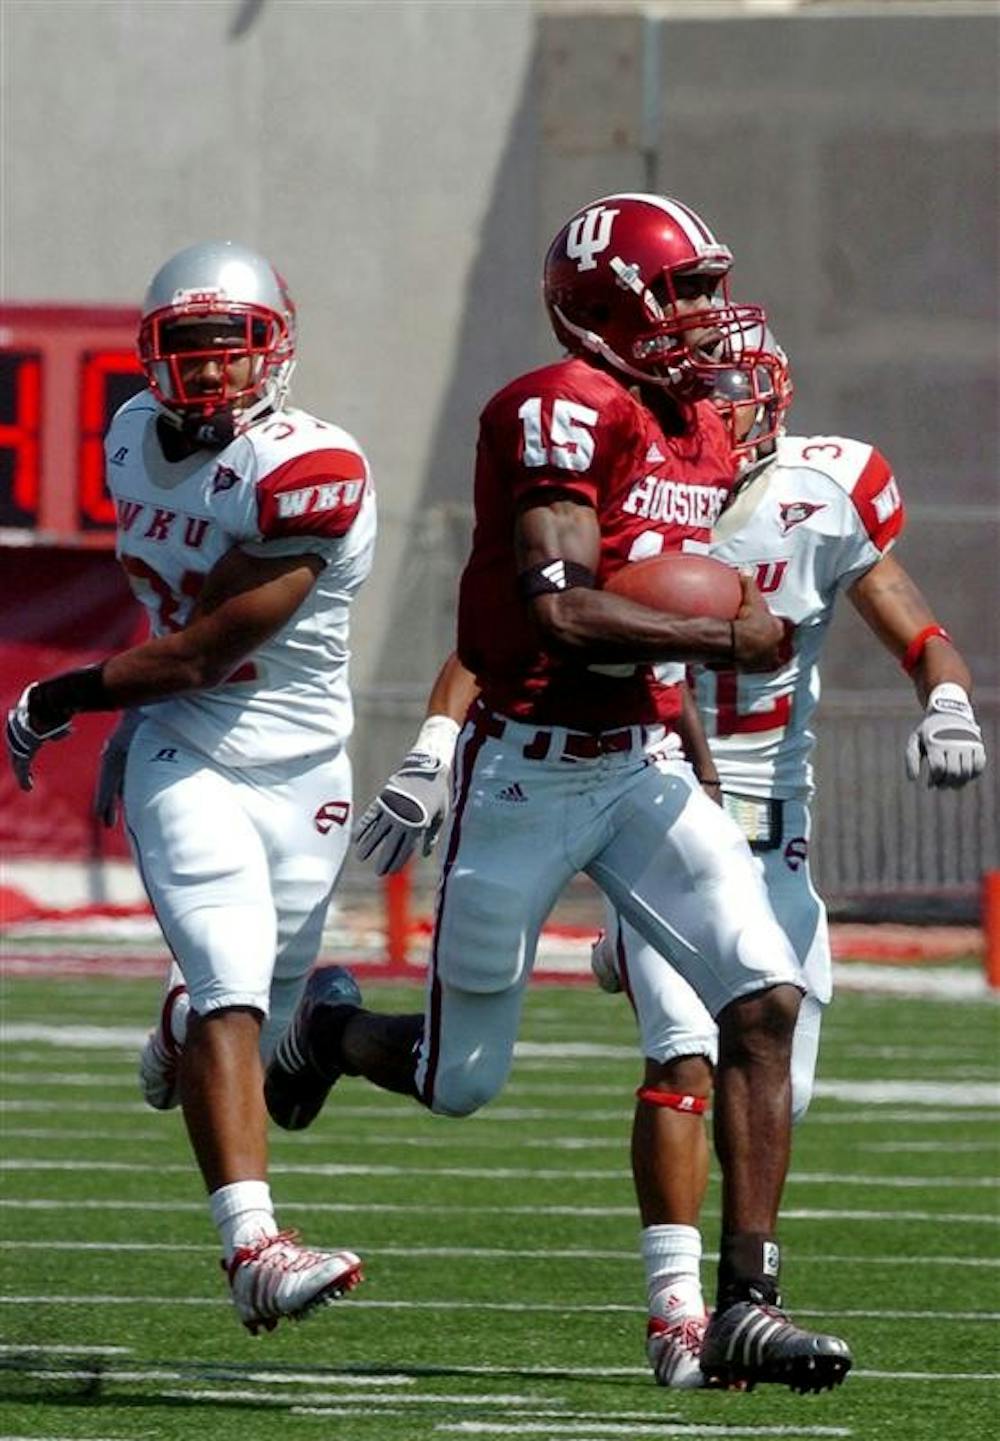 IU quarterback Kellen Lewis gets away from Western Kentucky defenders to score his first touchdown on a 75-yard run in the first half during a game on Aug. 30, 2008 at Memorial Stadium. IU won 31-13.